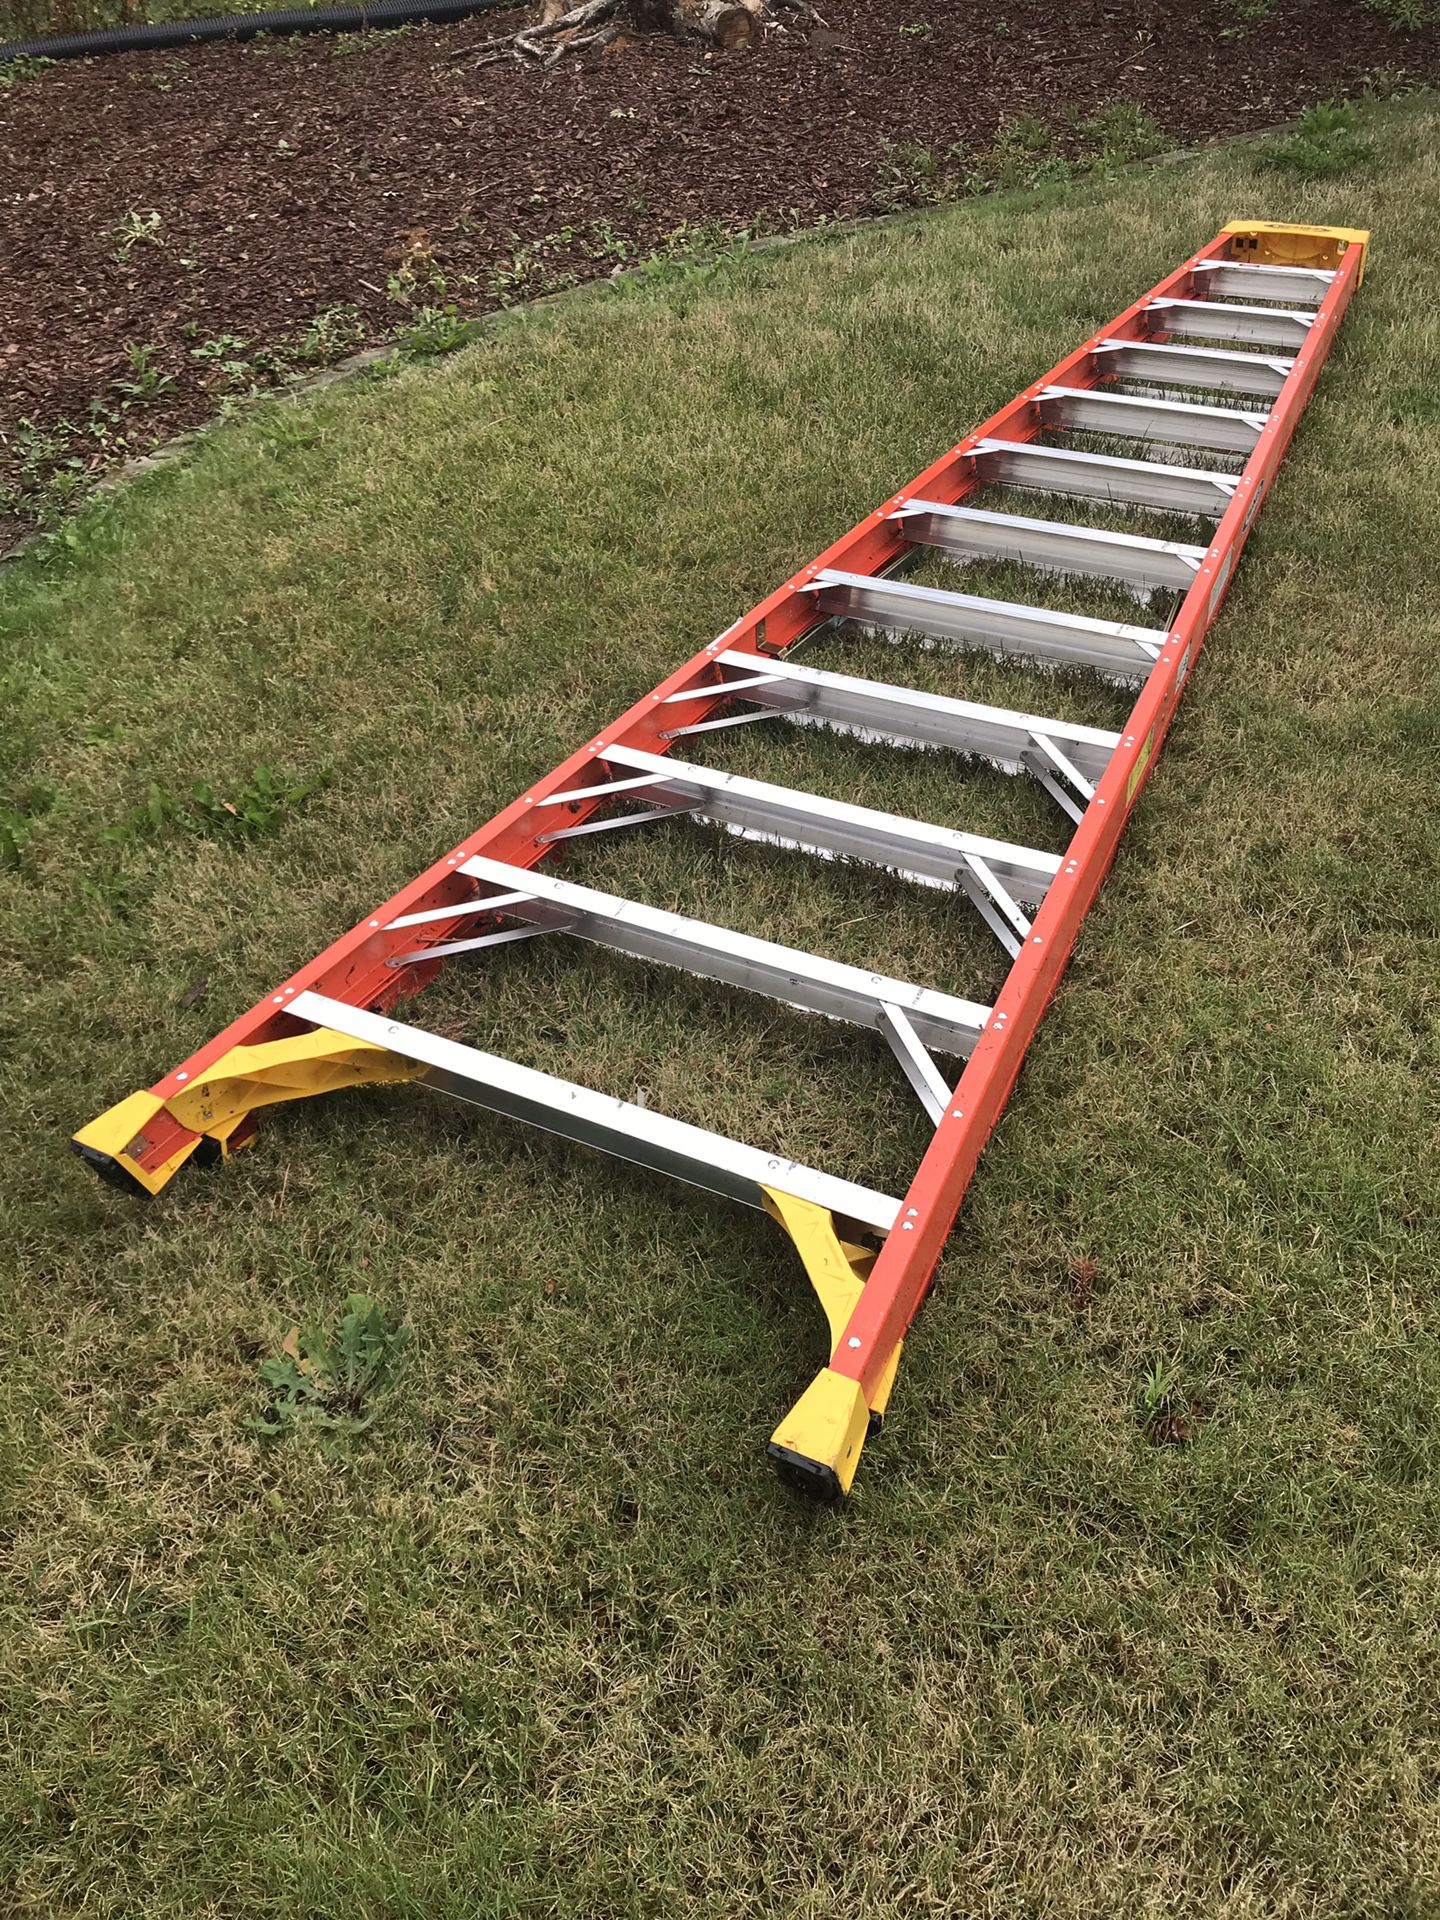 Werner 12 ft ladder heavy duty 300 lb rating almost new